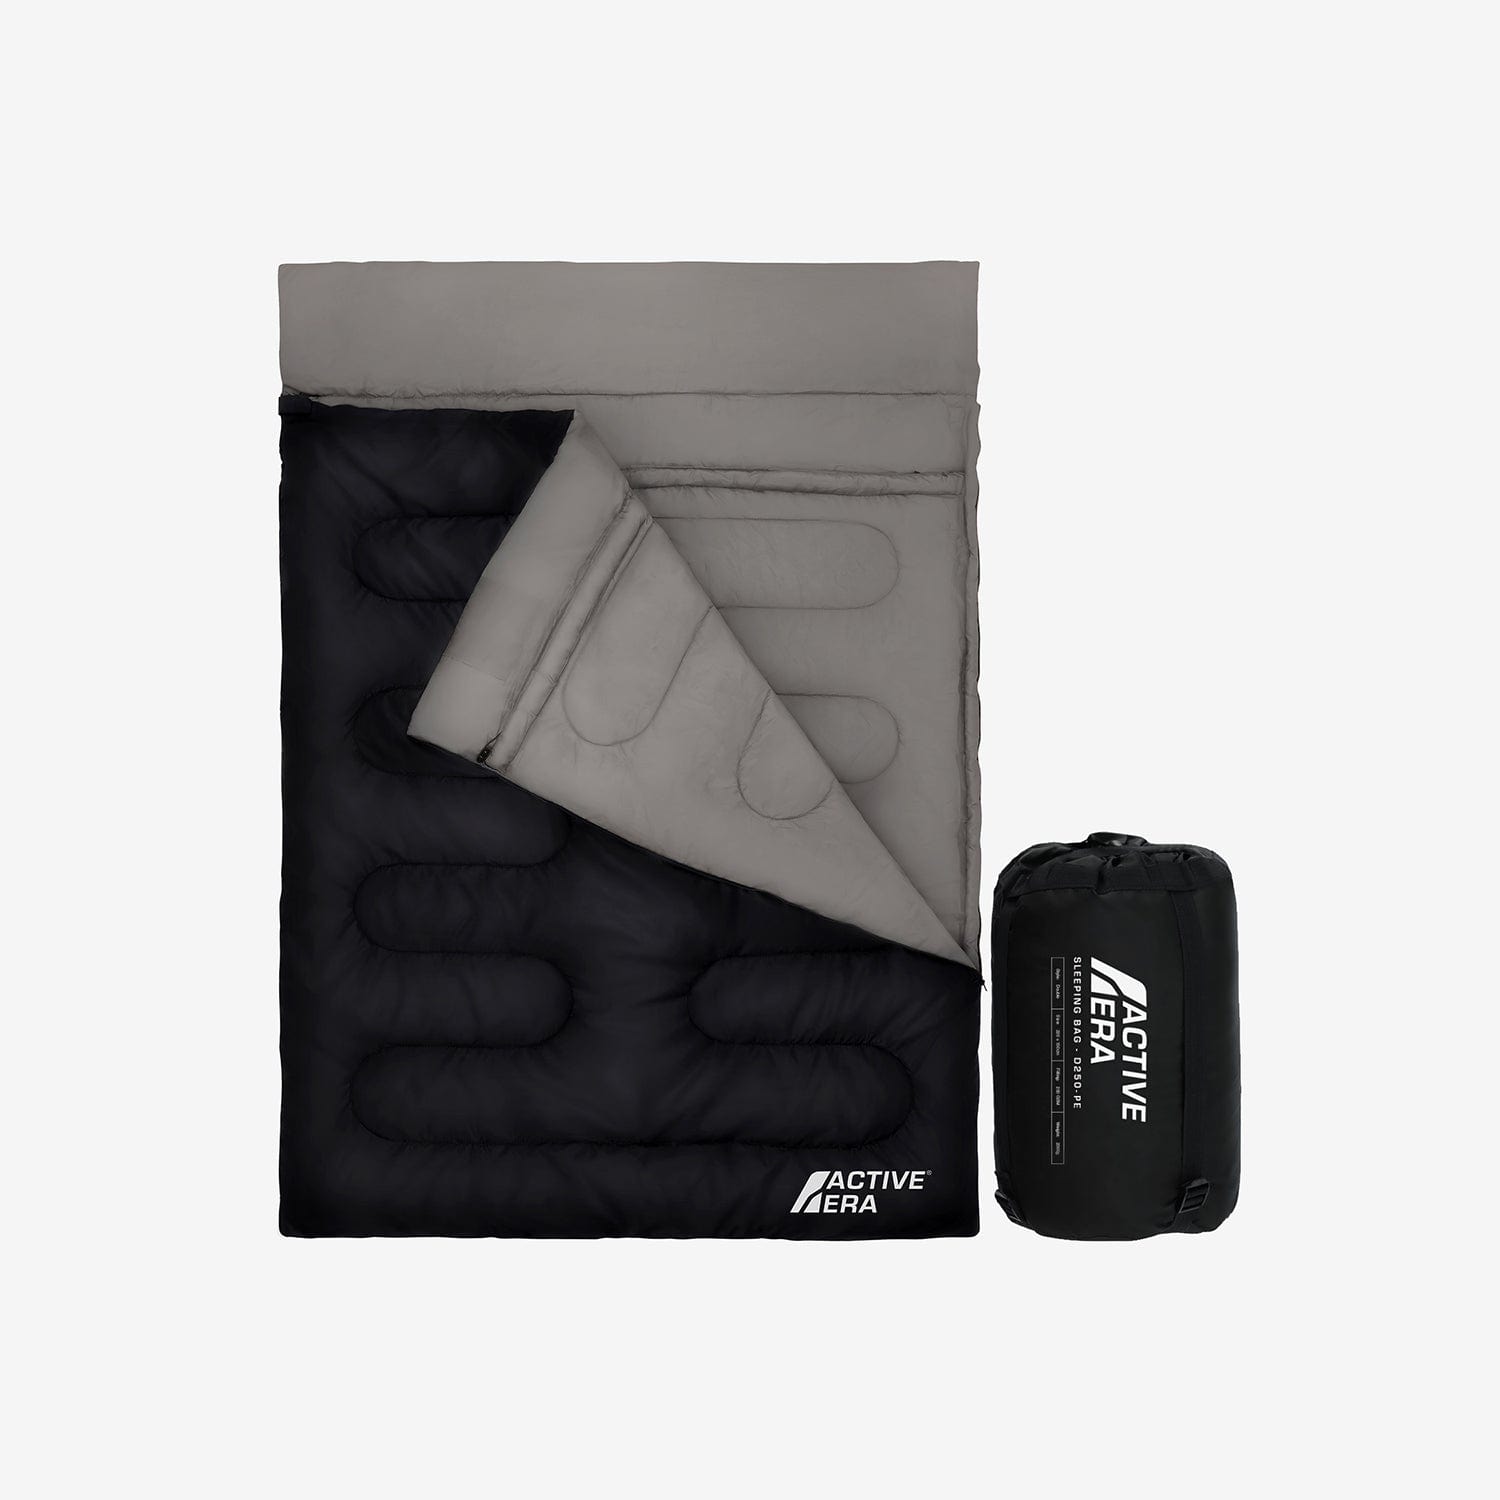 Double Sleeping Bag - Extra Large Queen Size, Free Delivery